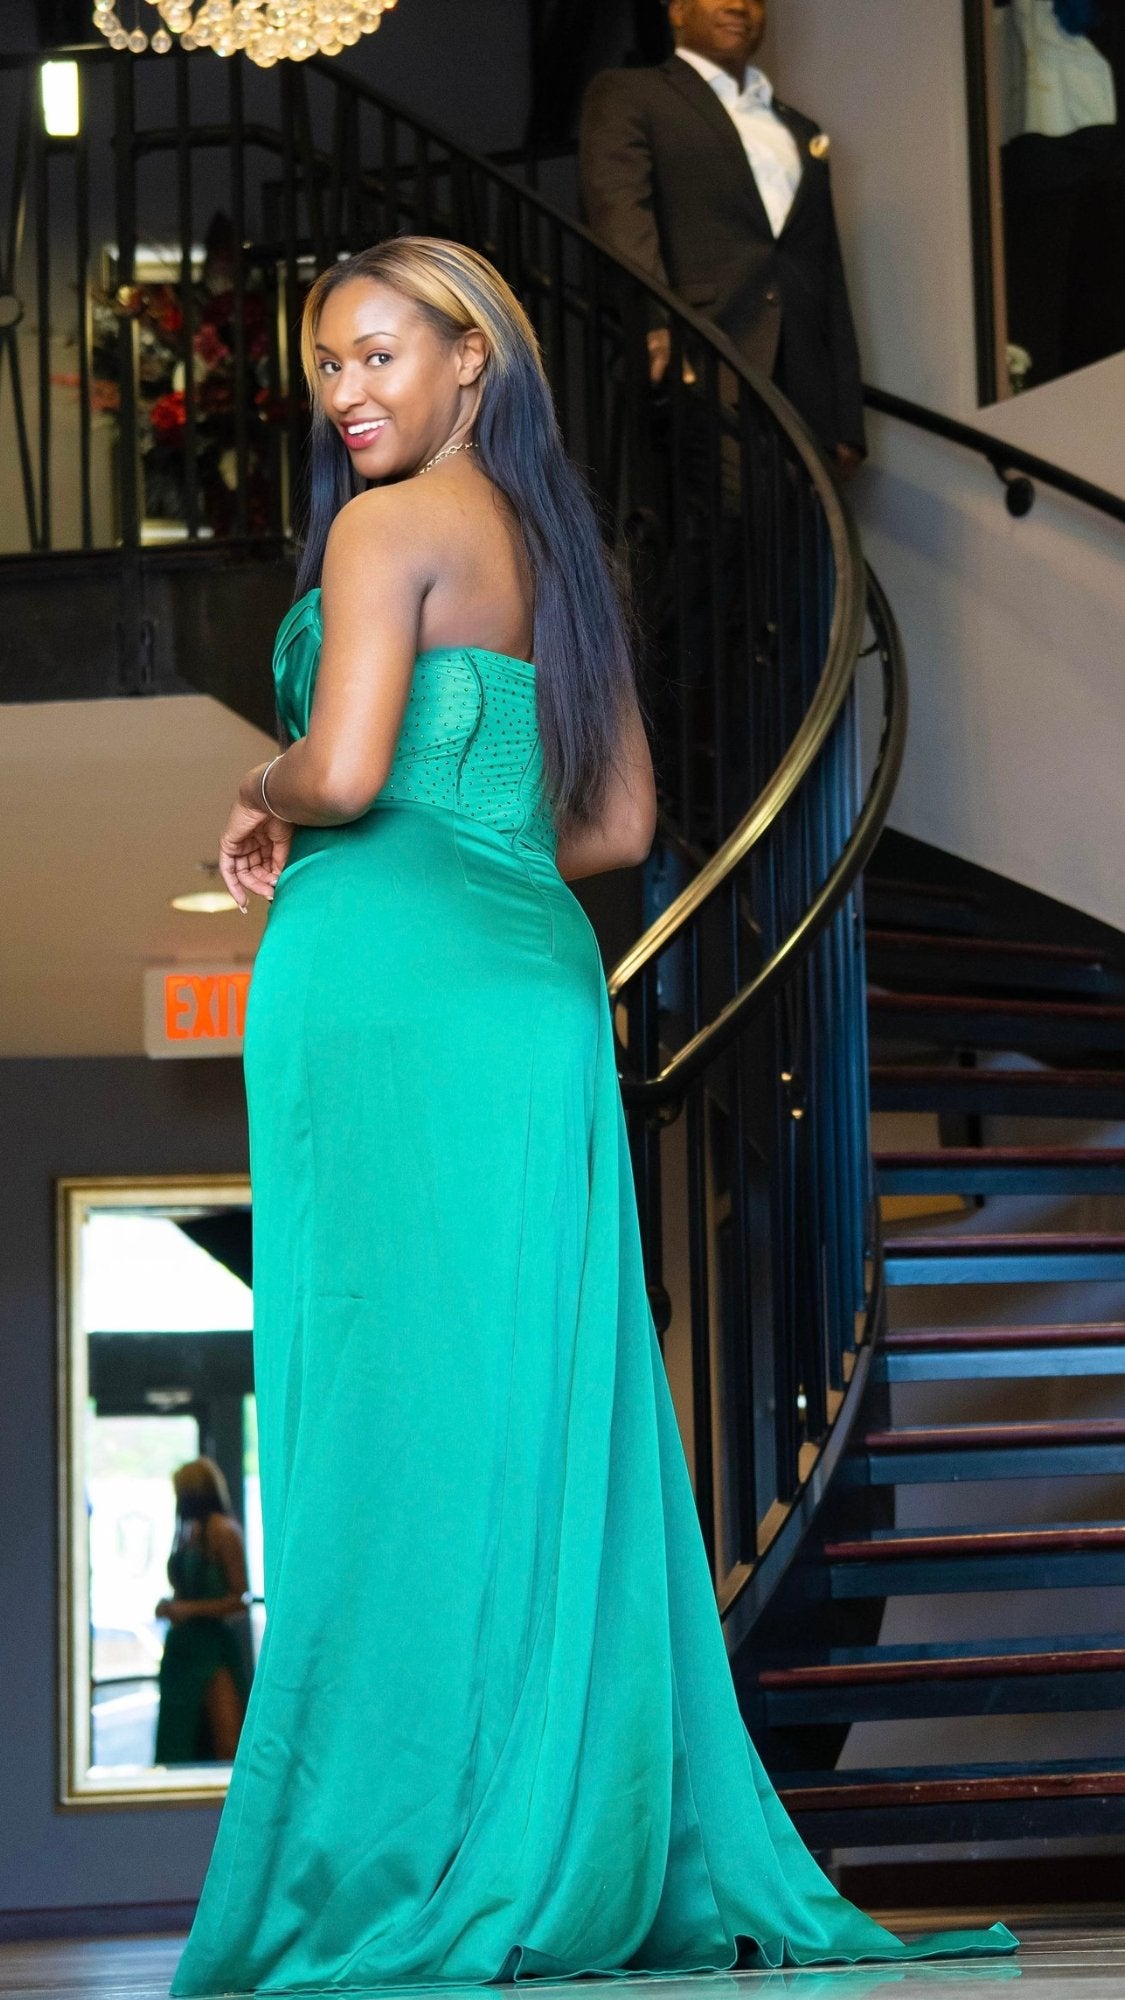 Emerald Green Satin Gown - Very Ashley